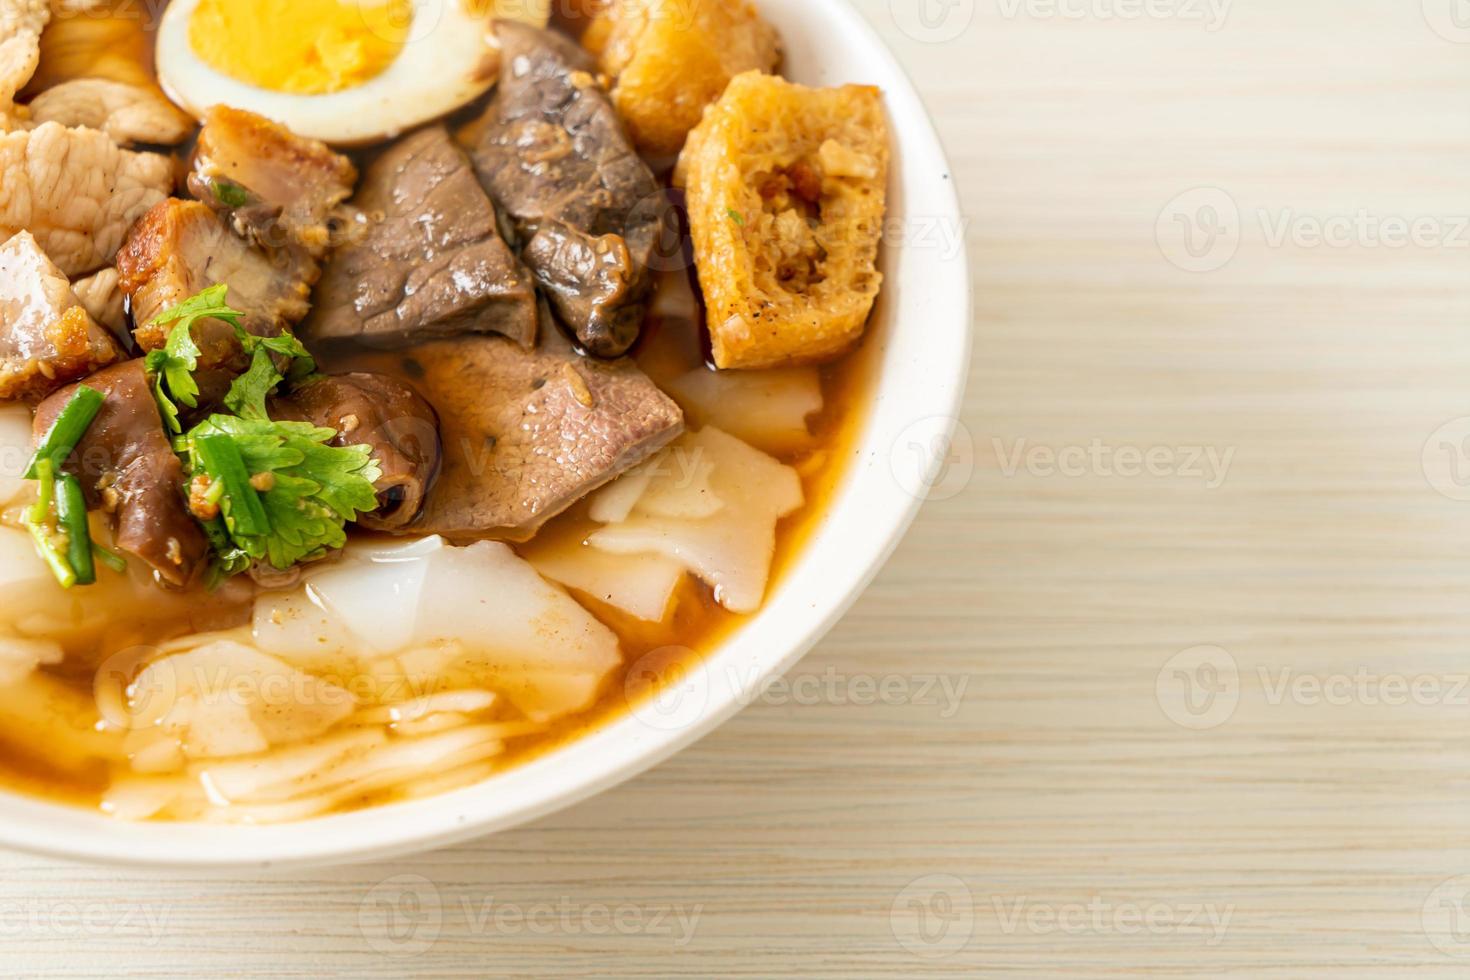 Paste of rice flour or boiled Chinese pasta square with pork in brown soup - Asian food style photo